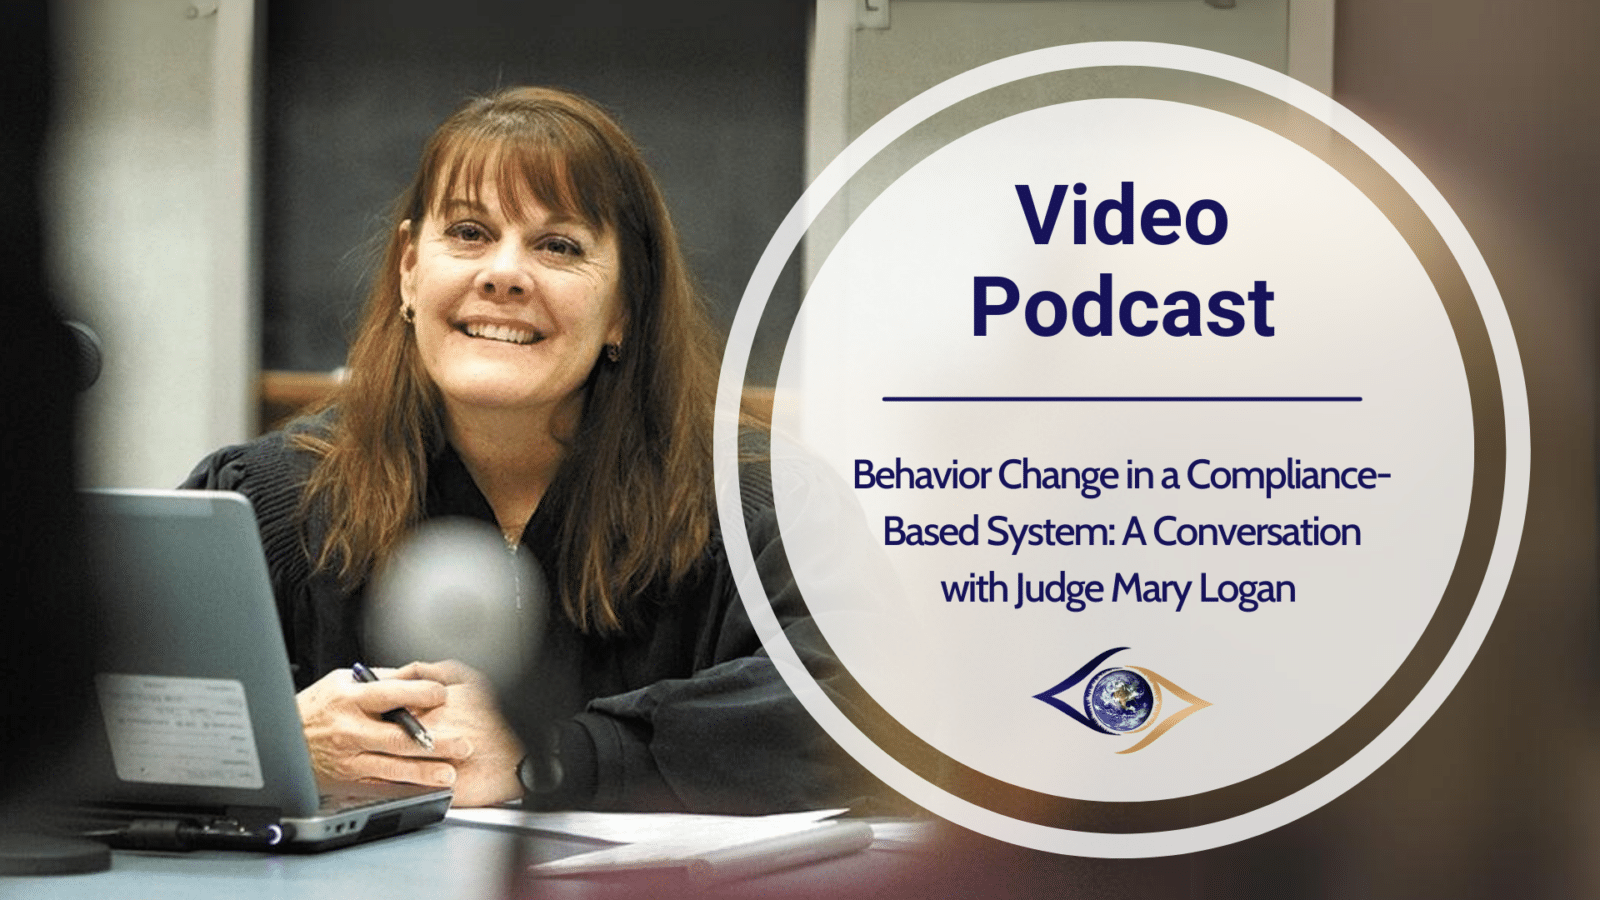 Behavior Change in a Compliance-Based System: A Conversation with Judge Mary Logan I